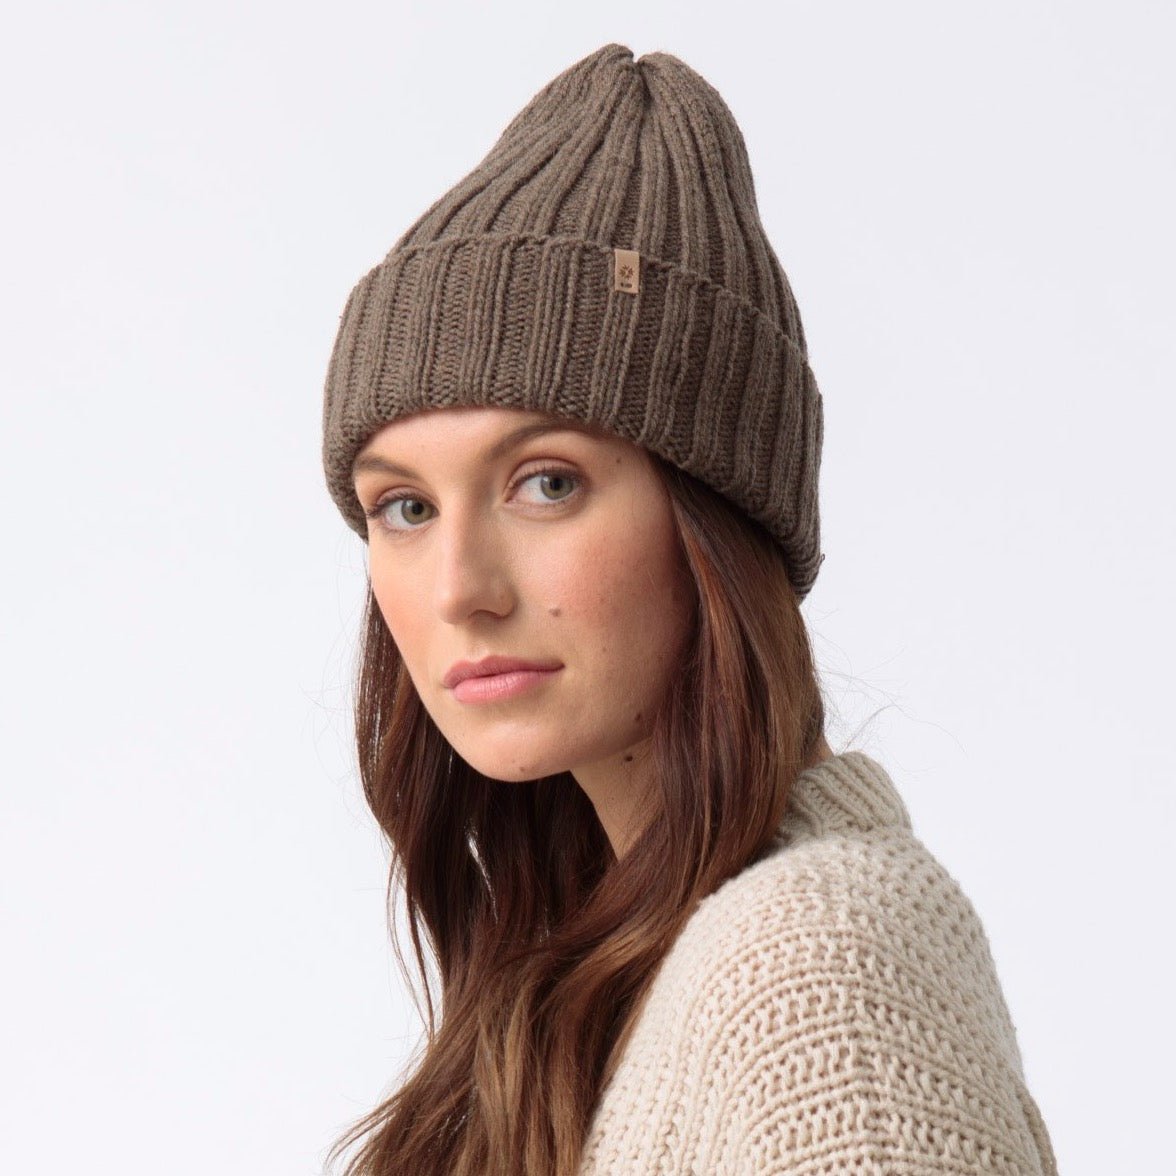 Model wears a dark brown cuffed hat with thick ribbed design and decrease detail at the top. The Merino Thick Rib Hat in Nutmeg Brown is designed by Dinadi and hand knitted in Kathmandu, Nepal.